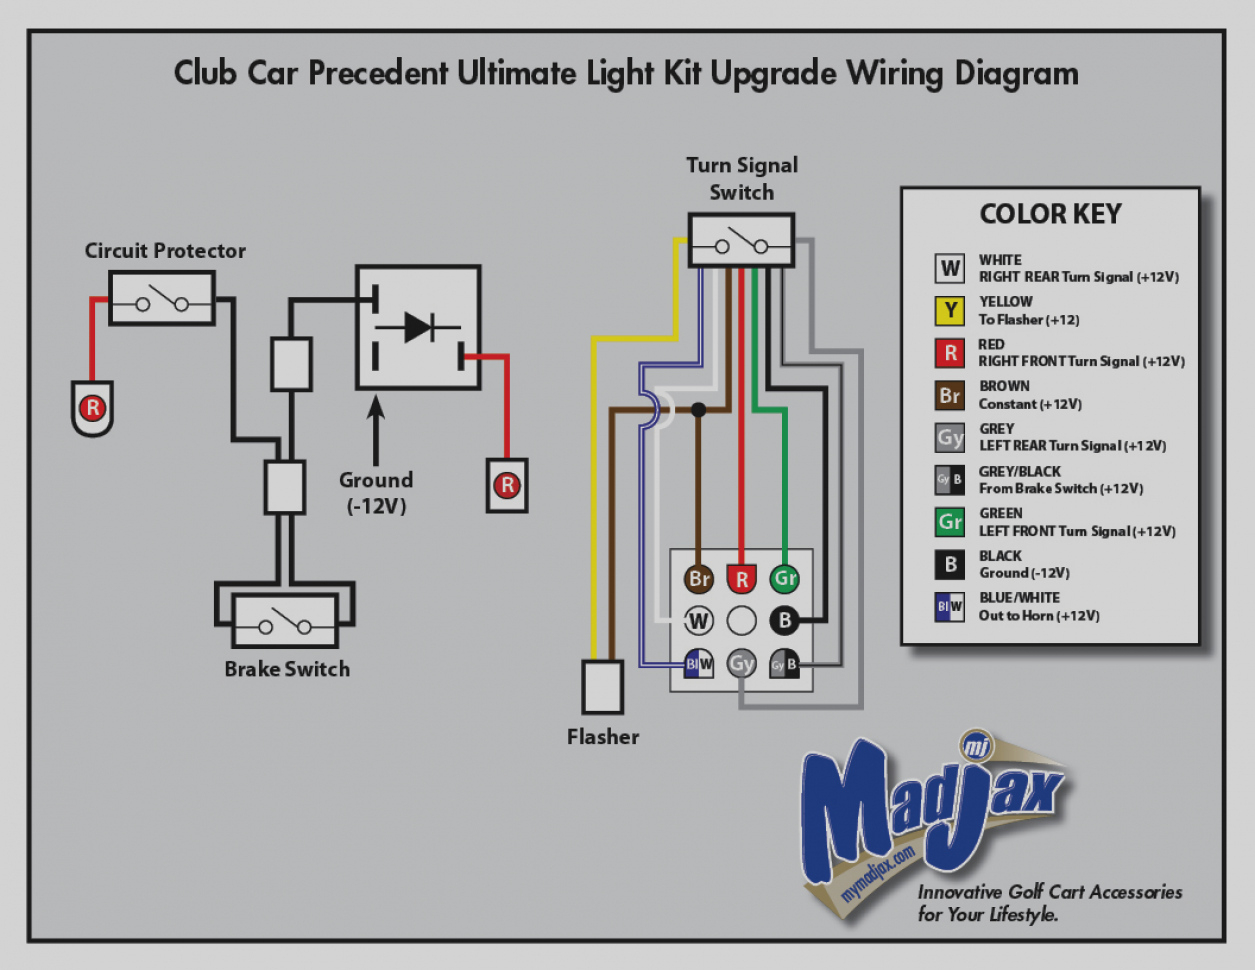 Tail Light Wiring Diagram 1995 Chevy Truck Unique Brake Switch 12 4 - Tail Light Wiring Diagram 1995 Chevy Truck